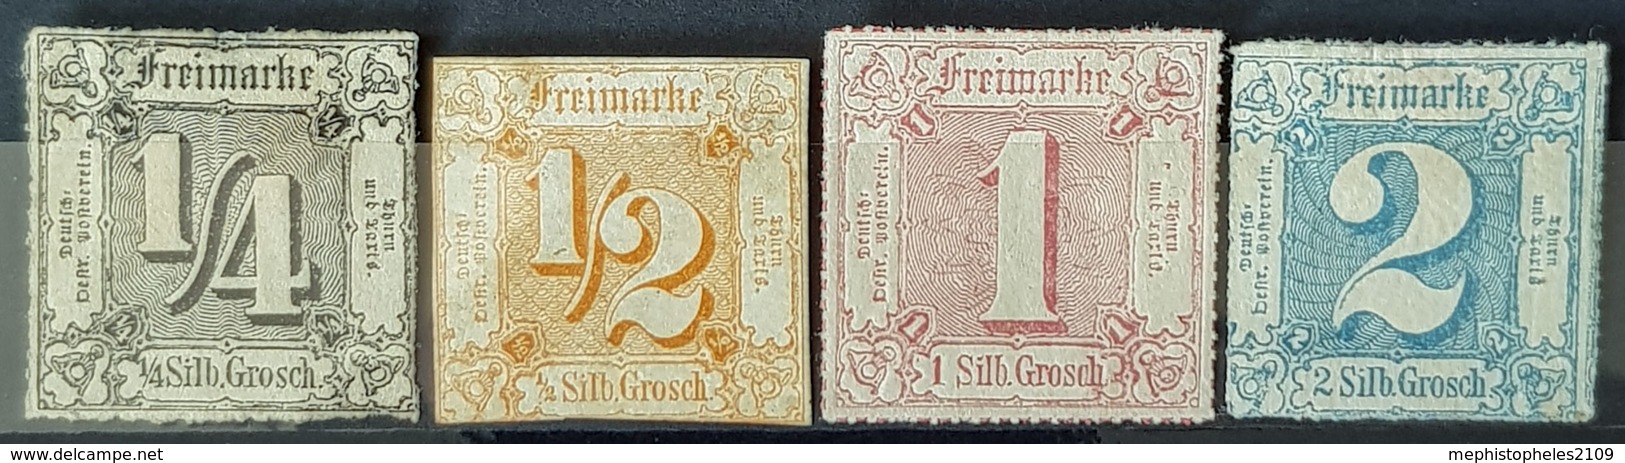 THURN AND TAXIS 1862 - MLH - Mi 26, 28, 29, 30 - 1/4g 1/2g 1g 2g - Mint